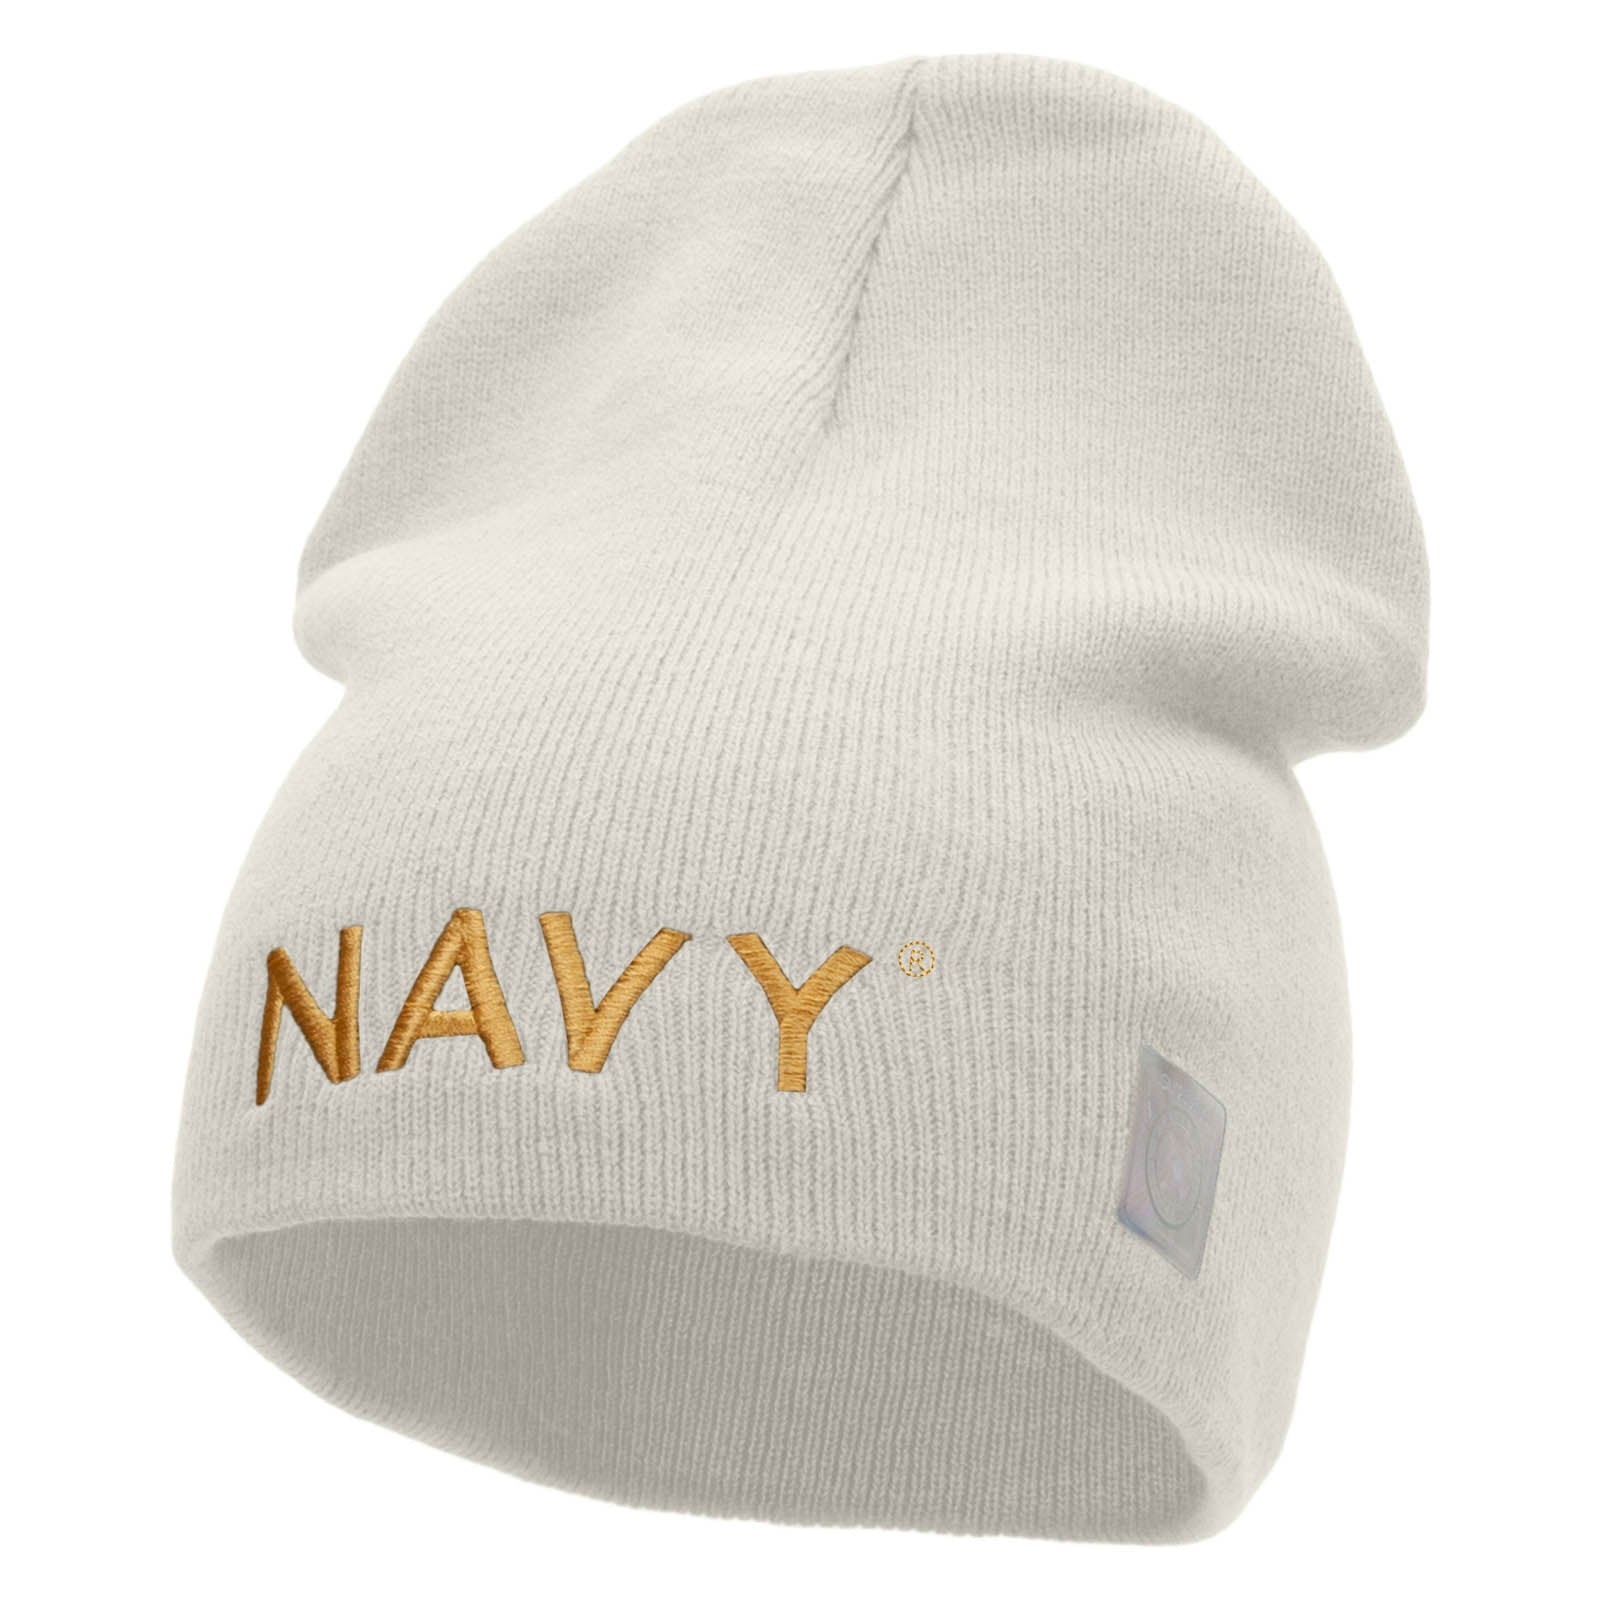 Licensed Navy Military Embroidered Short Beanie Made in USA - White OSFM